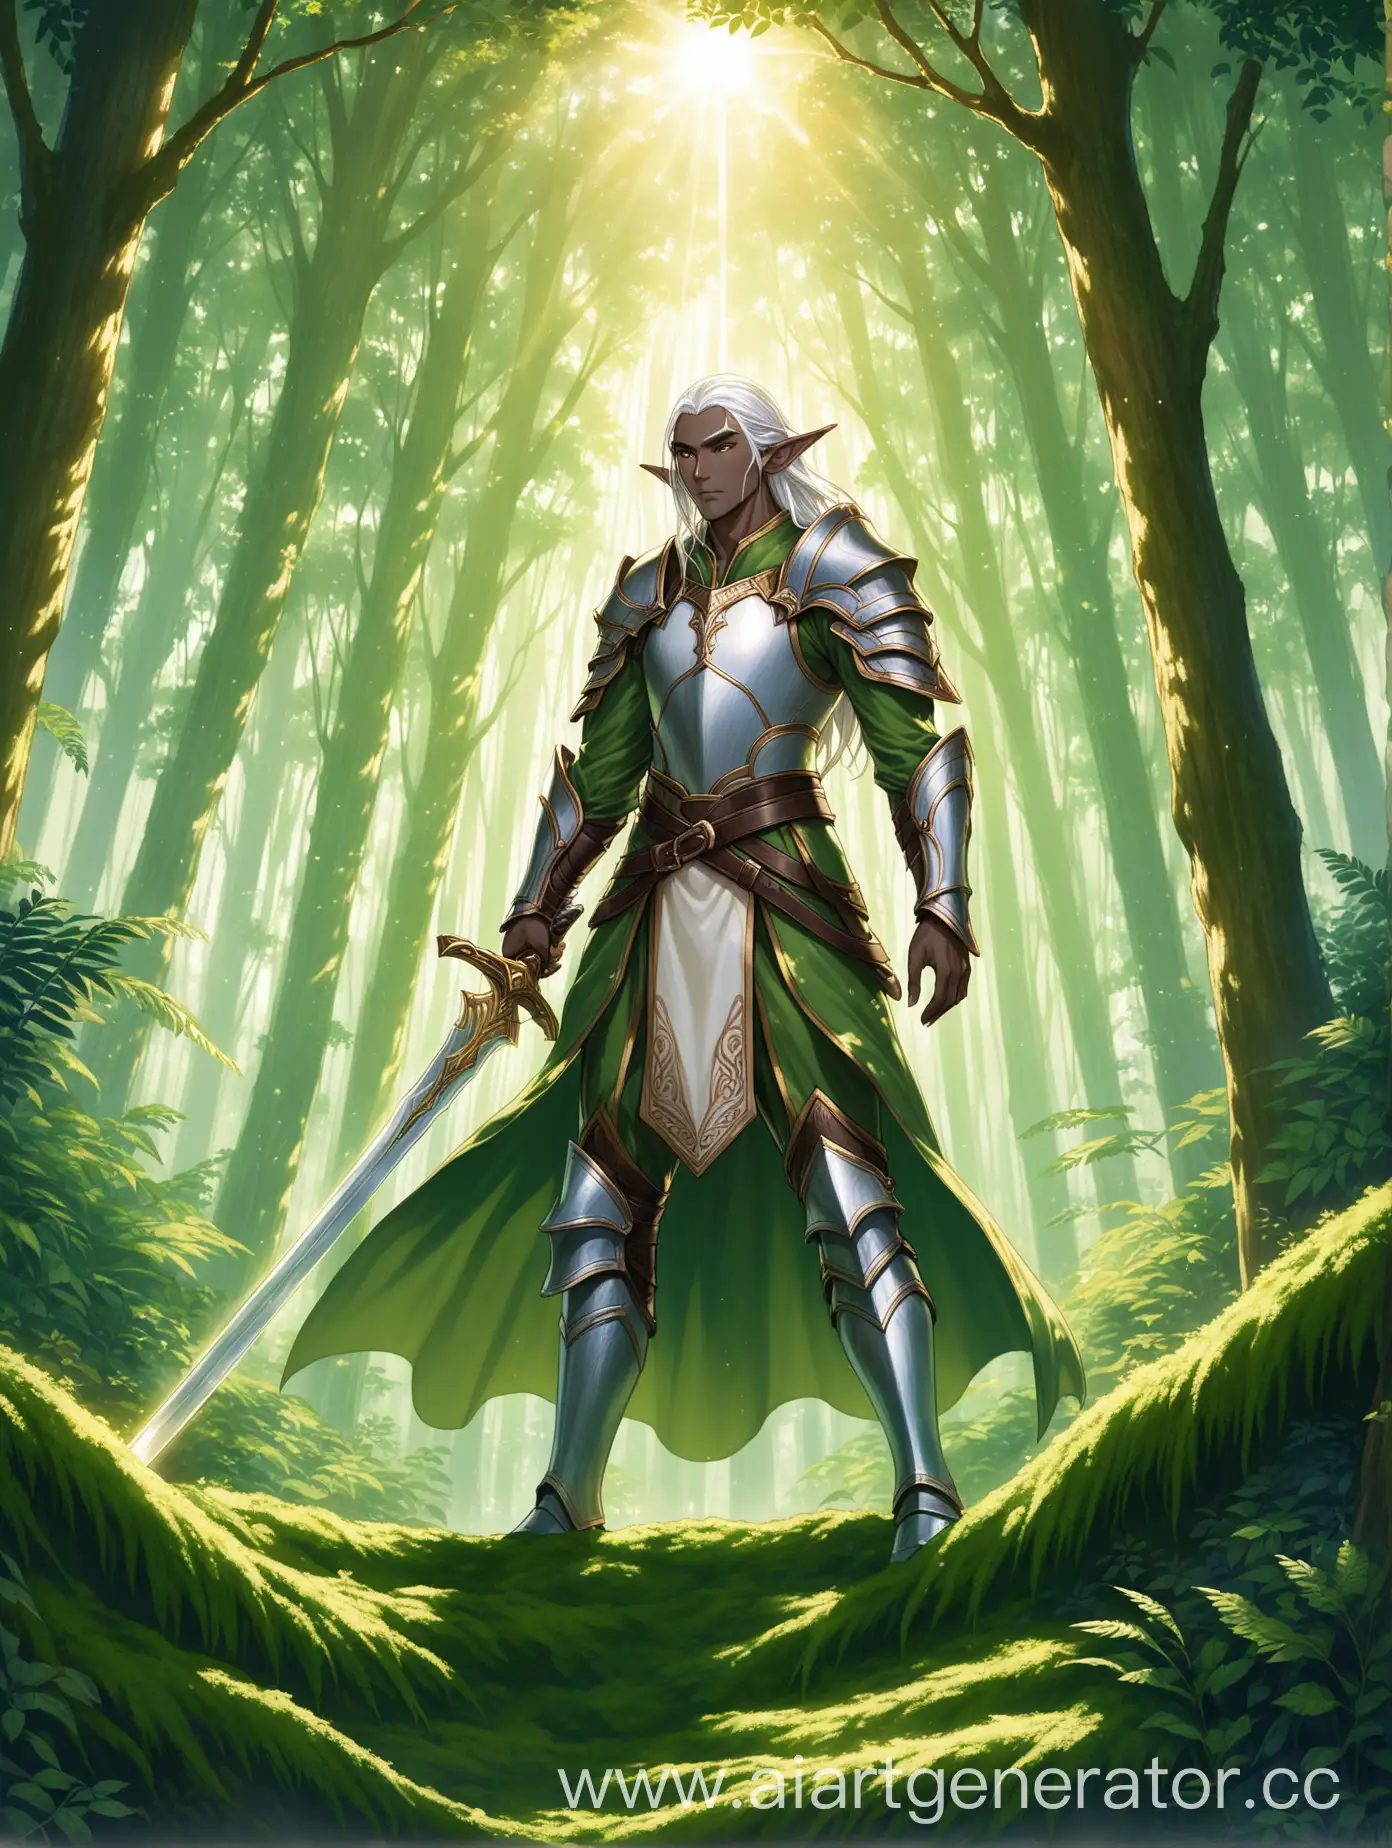 Elven-Warrior-in-Gleaming-Armor-Stands-Proud-in-Lush-Forest-Clearing